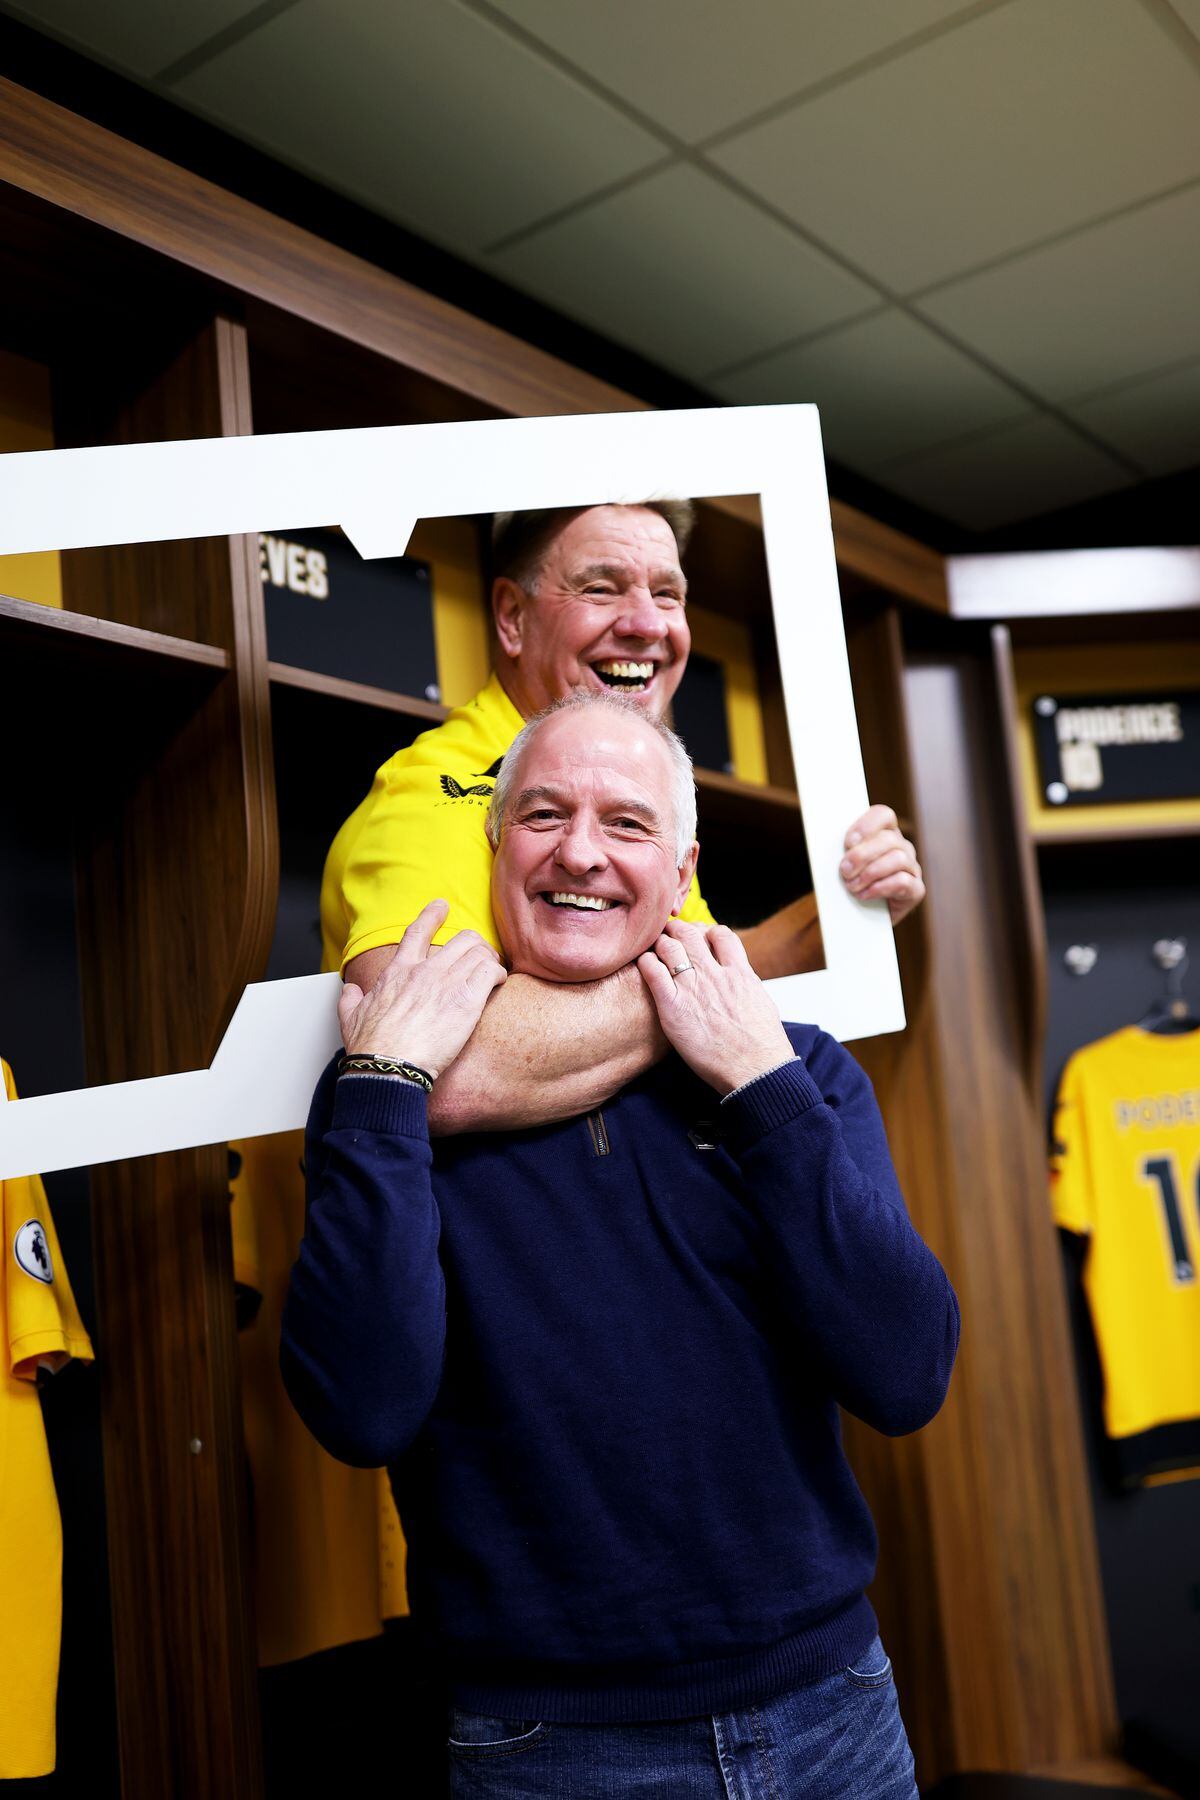 Steve Bull surprises a Wolves fan as part of a Wolves Wish at Molineux (Photo by Jack Thomas - WWFC/Wolves).